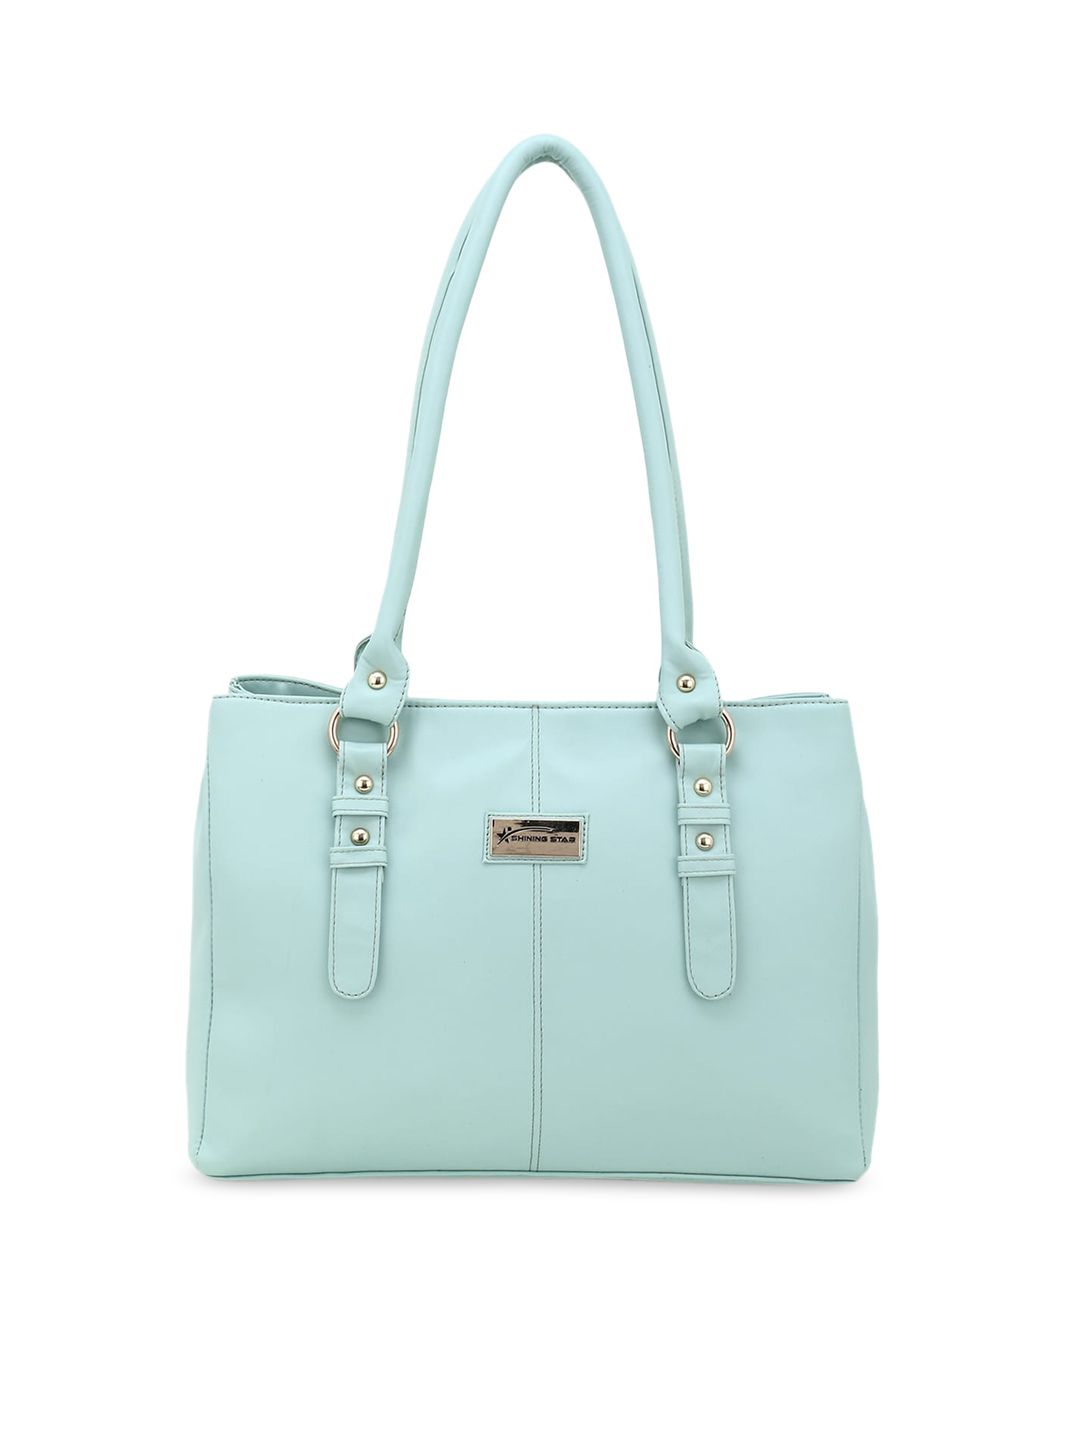 SHINING STAR Sea Green PU Structured Shoulder Bag Price in India